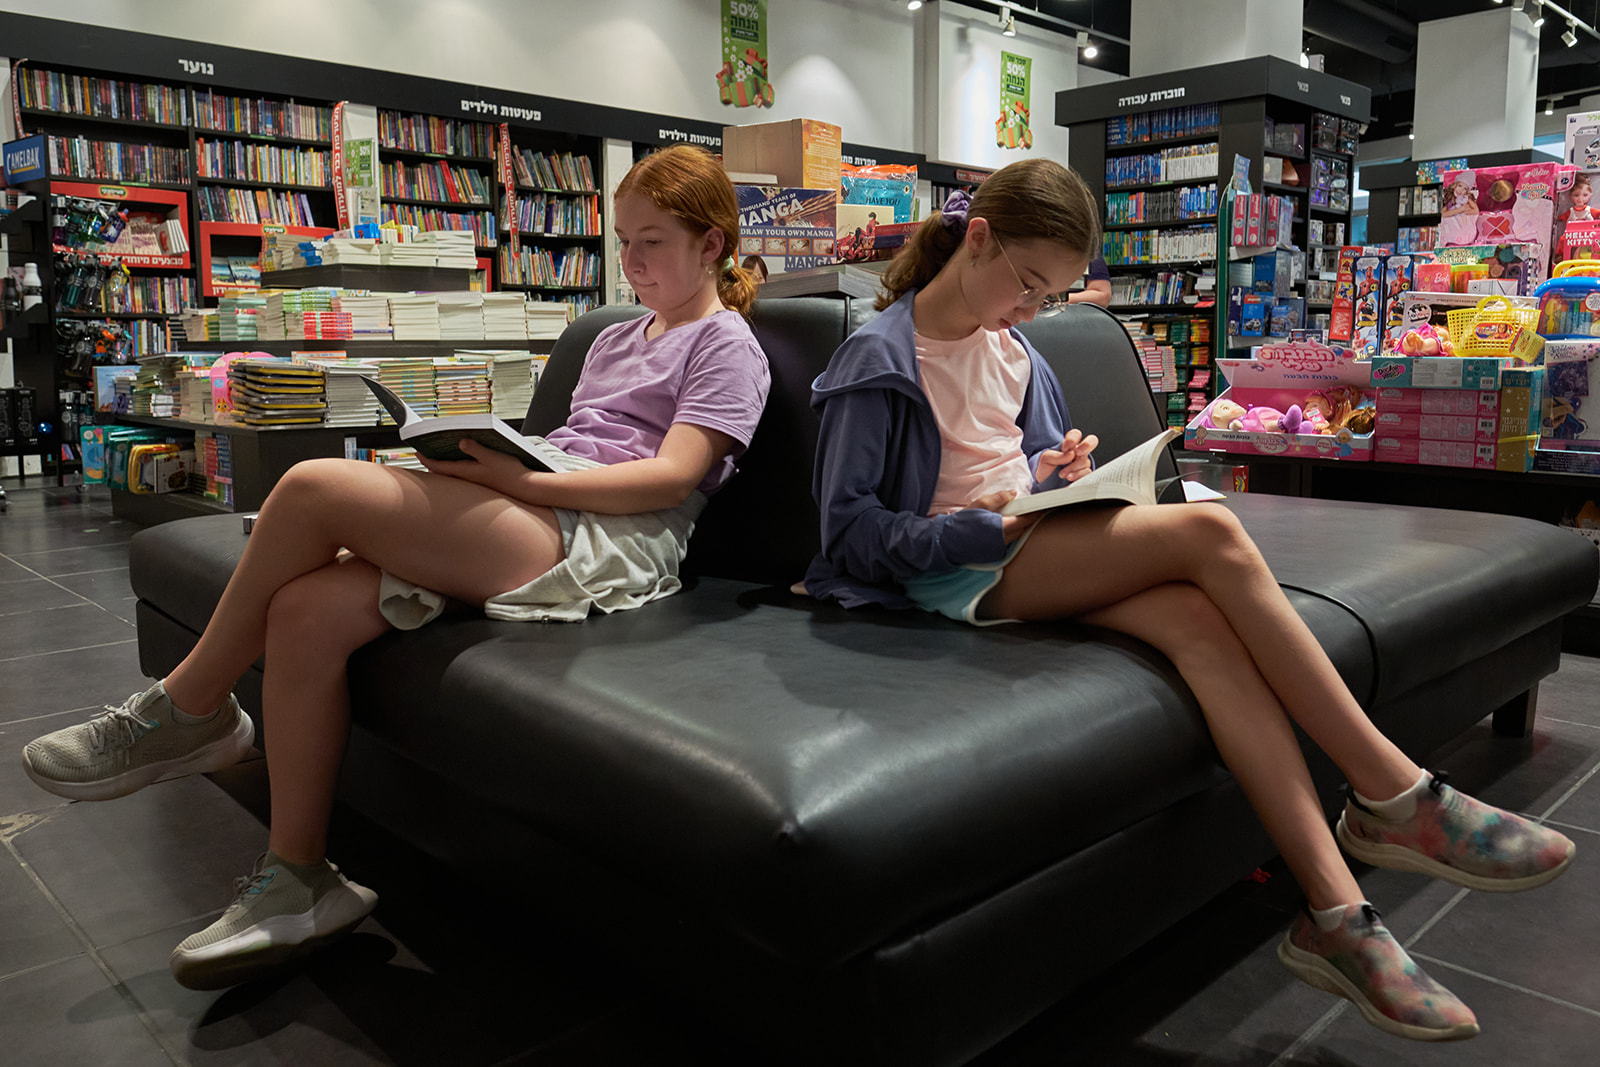 two girls sitting on a couch in a book shop reading